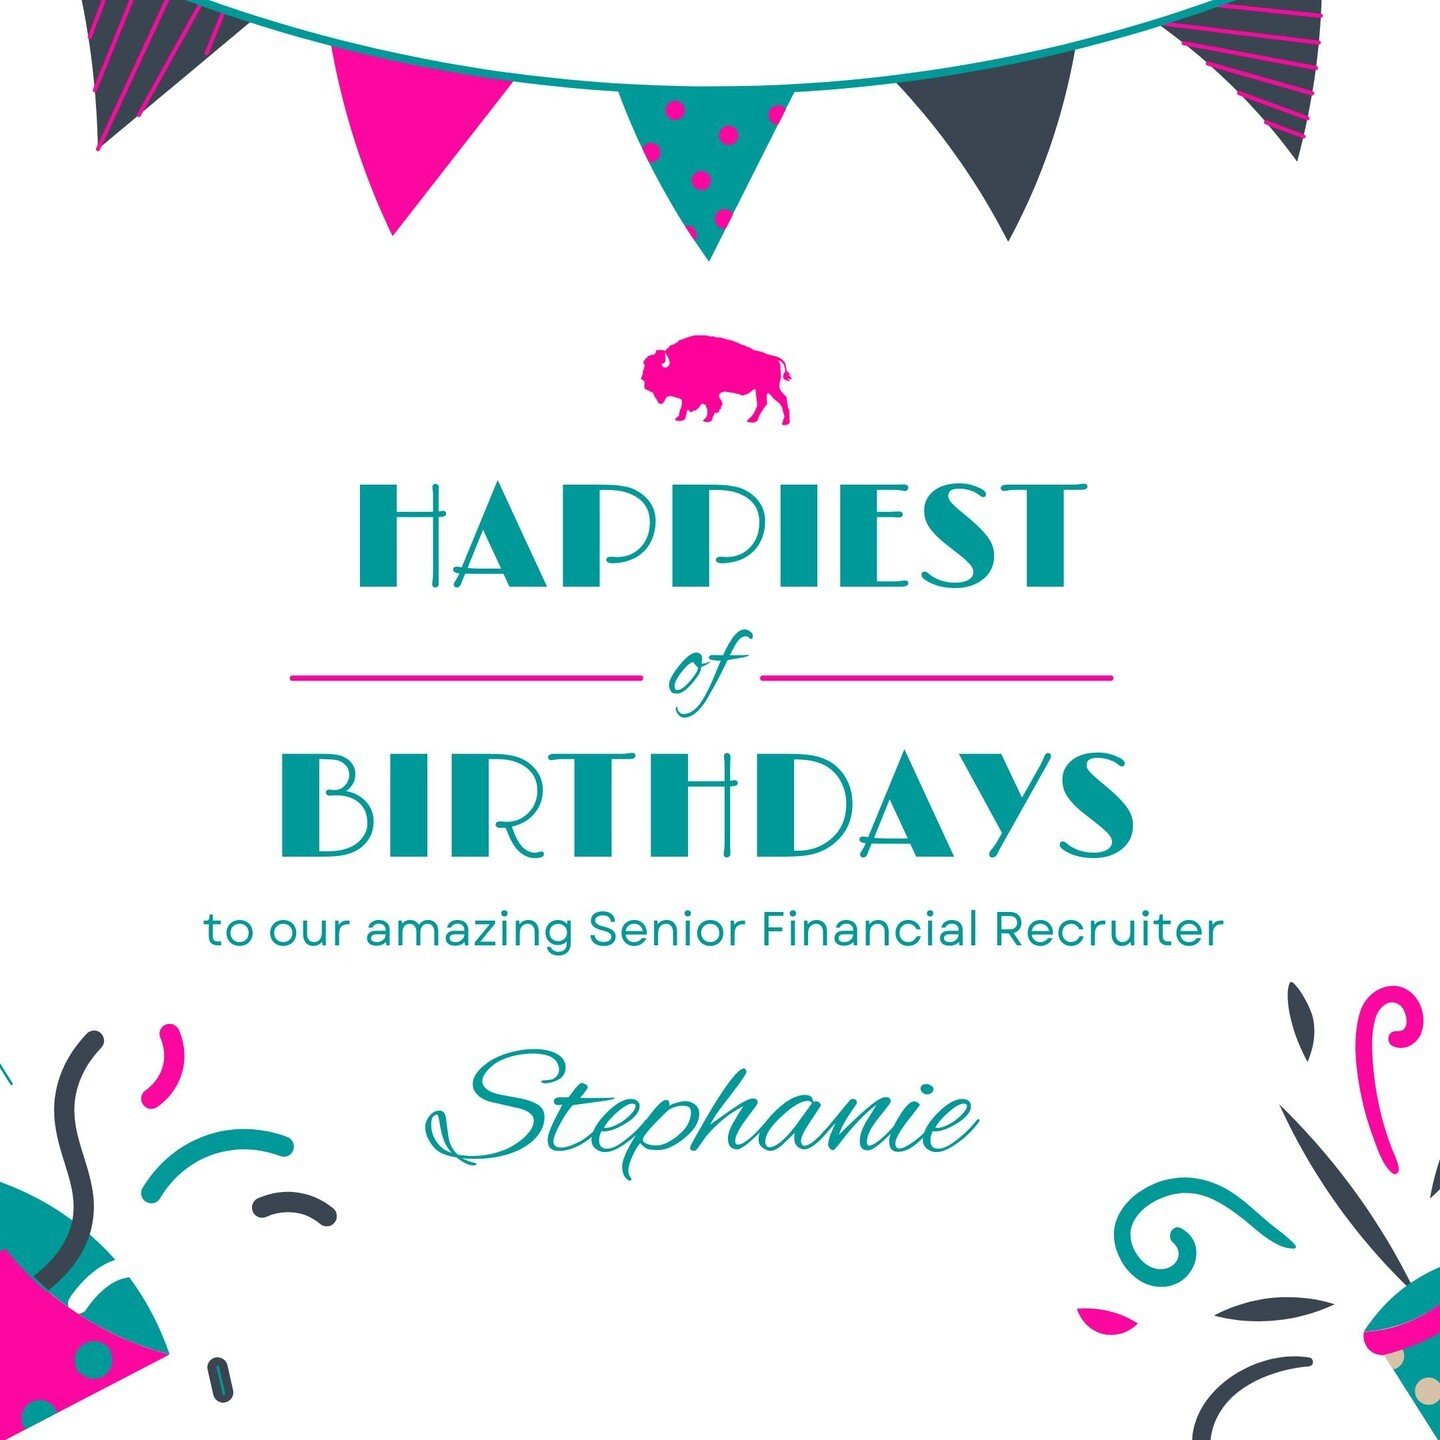 Happy Birthday to our incredible Sr. Financial Recruiter, @ste_hobbs! 🎉 Stephanie is an invaluable member of our team. Over the past 8 years, Stephanie has been dedicated to guiding candidates through the entire job search process with professionali